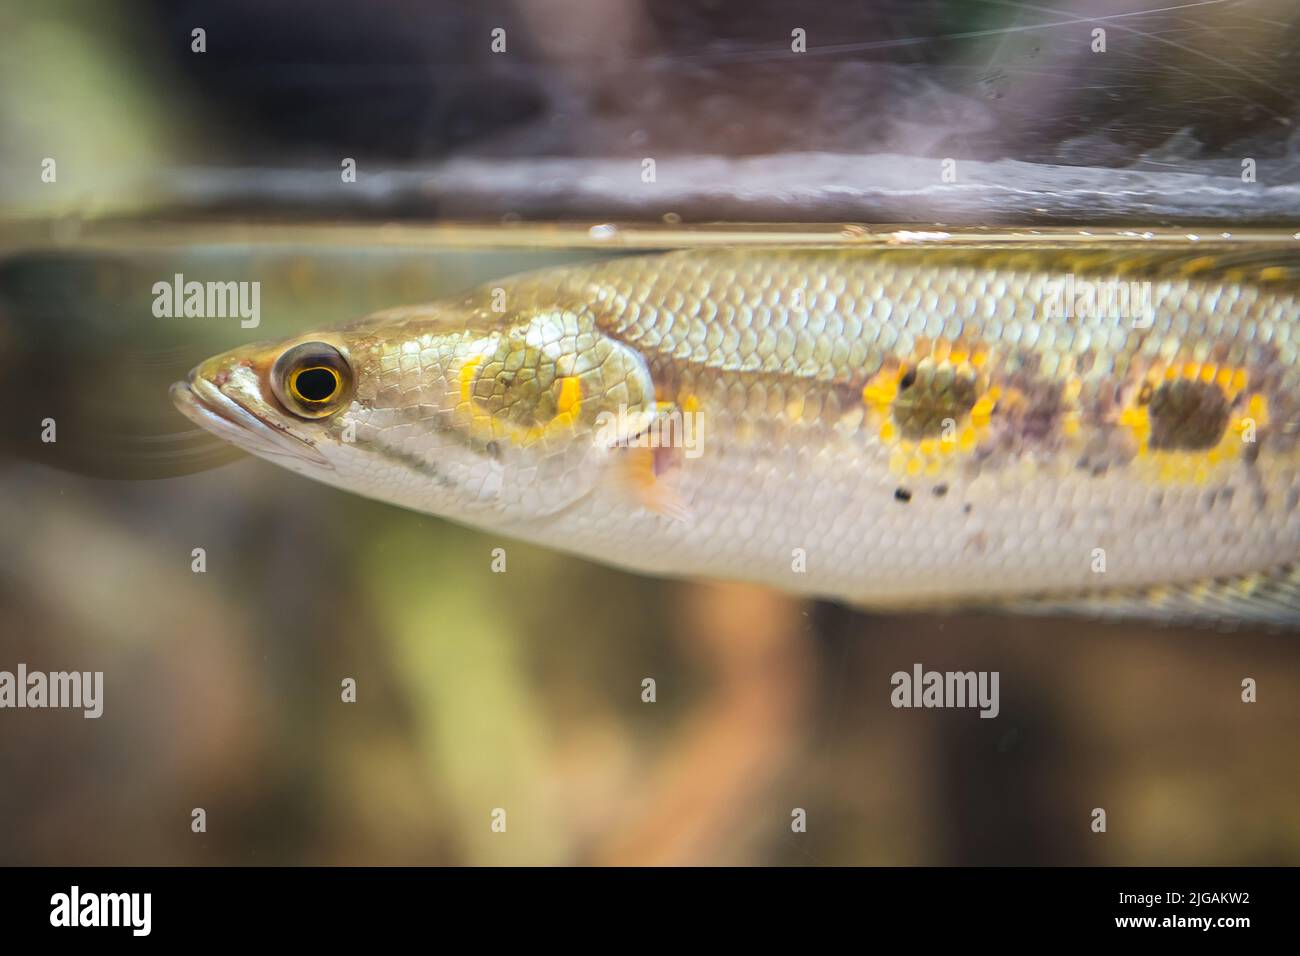 A closeup shot of Channa pleurophthalma in the water Stock Photo